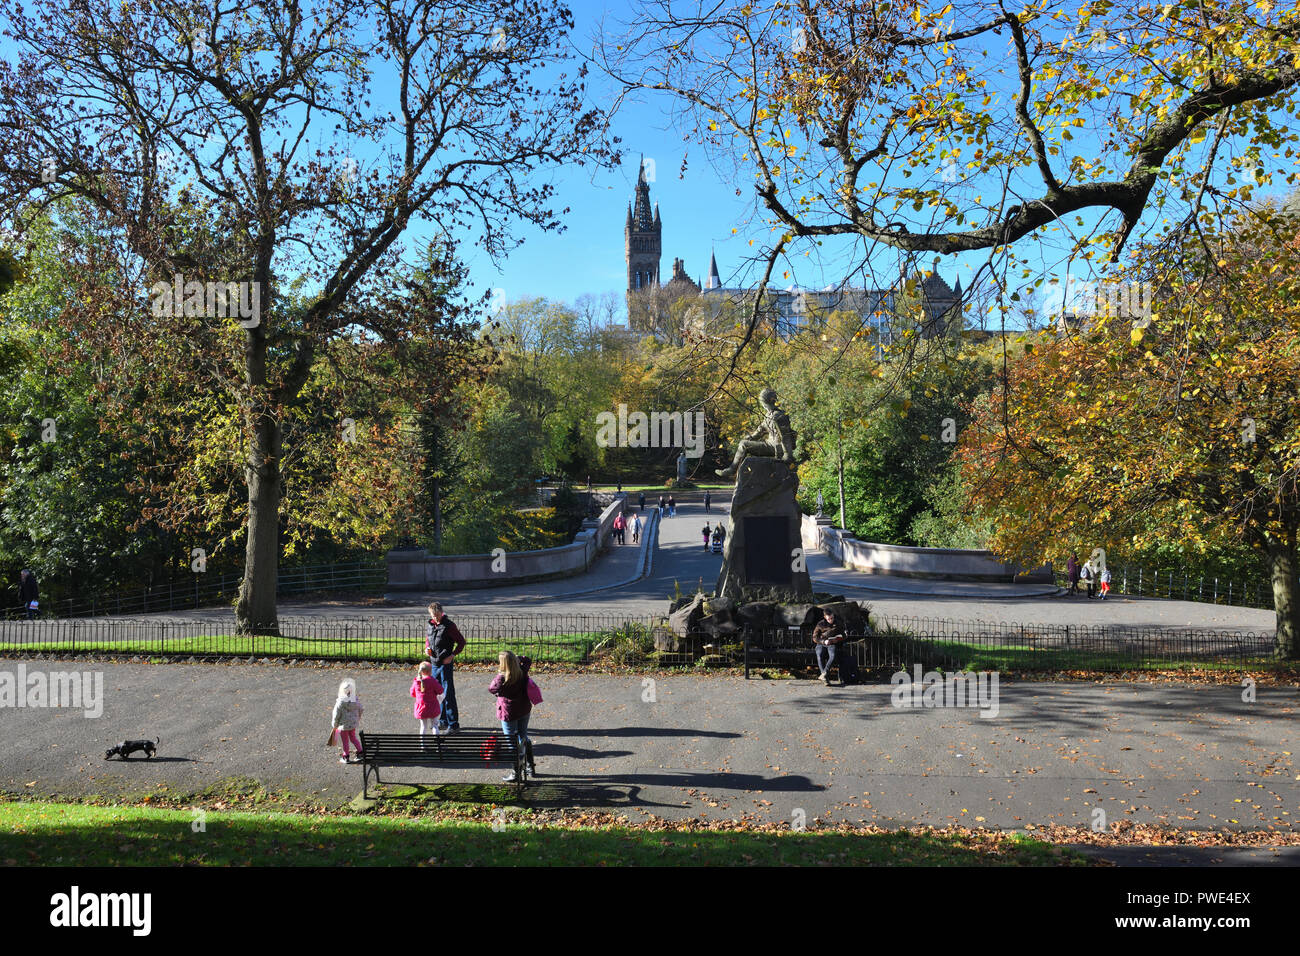 15th, October, 2018. A sunny Autumn day overlooking the HLI monument and bridge over the river Kelvin in Kelvingrove Park, Glasgow, Scotland, UK, Europe. Stock Photo